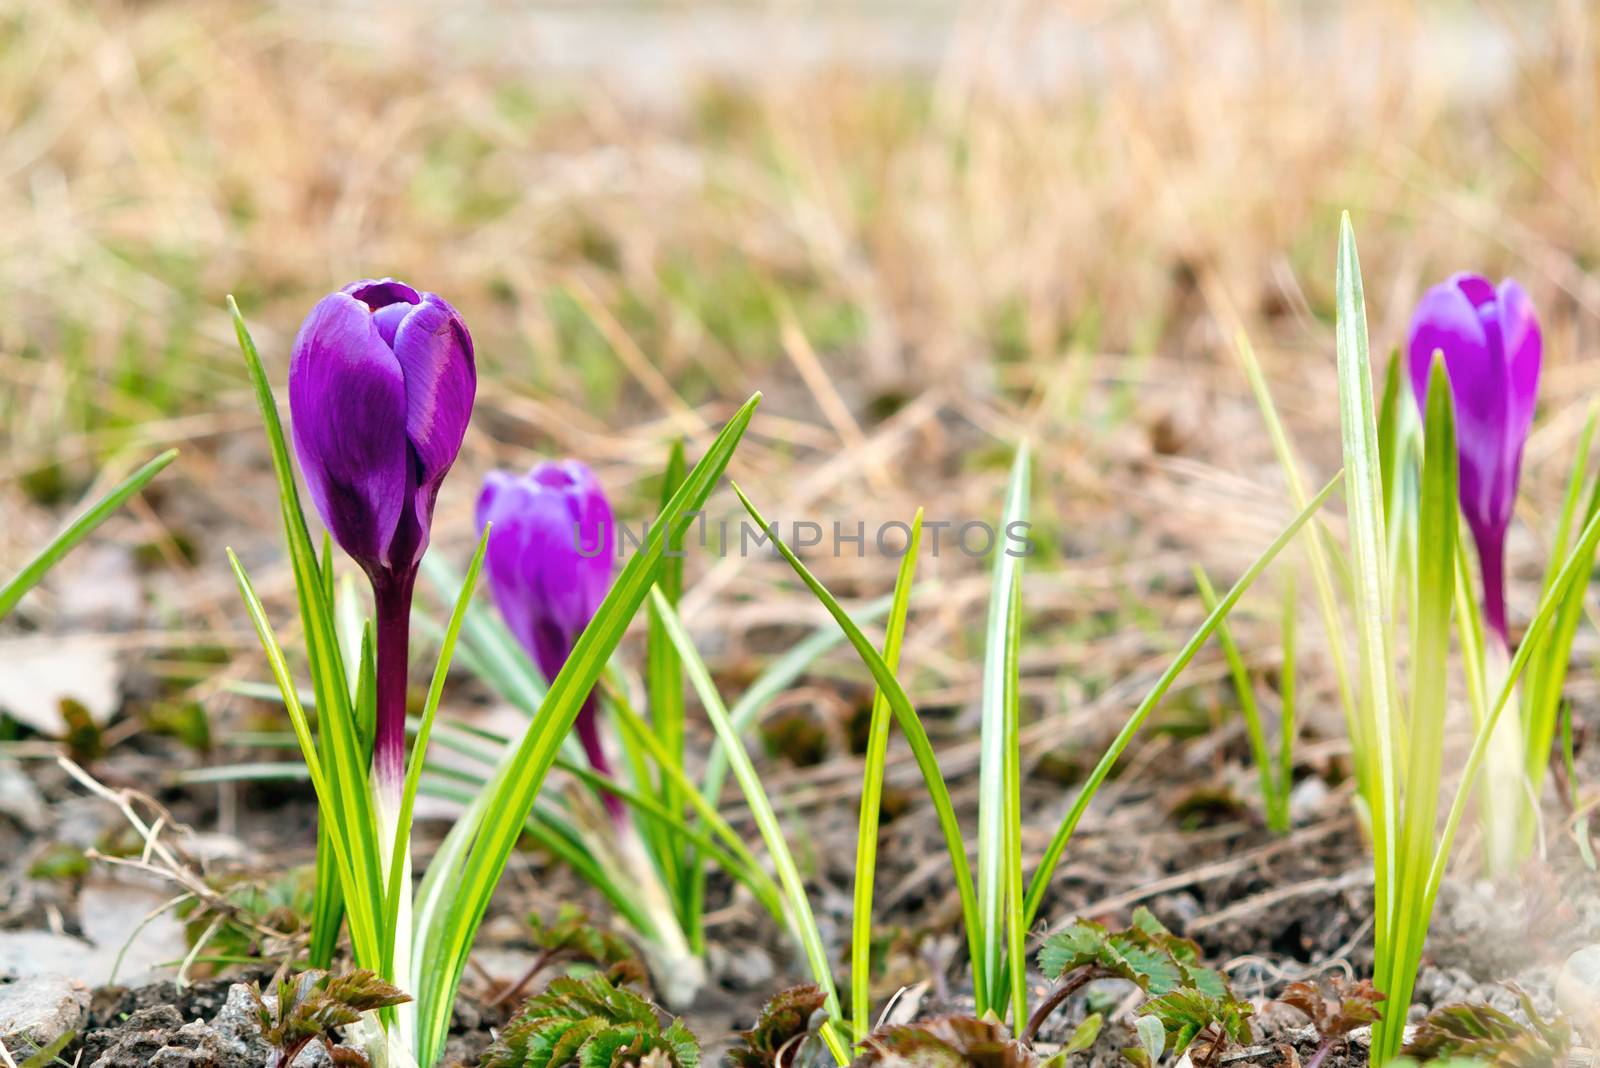 Blooming spring flowers of purple crocuses on a lawn on a sunny spring day.